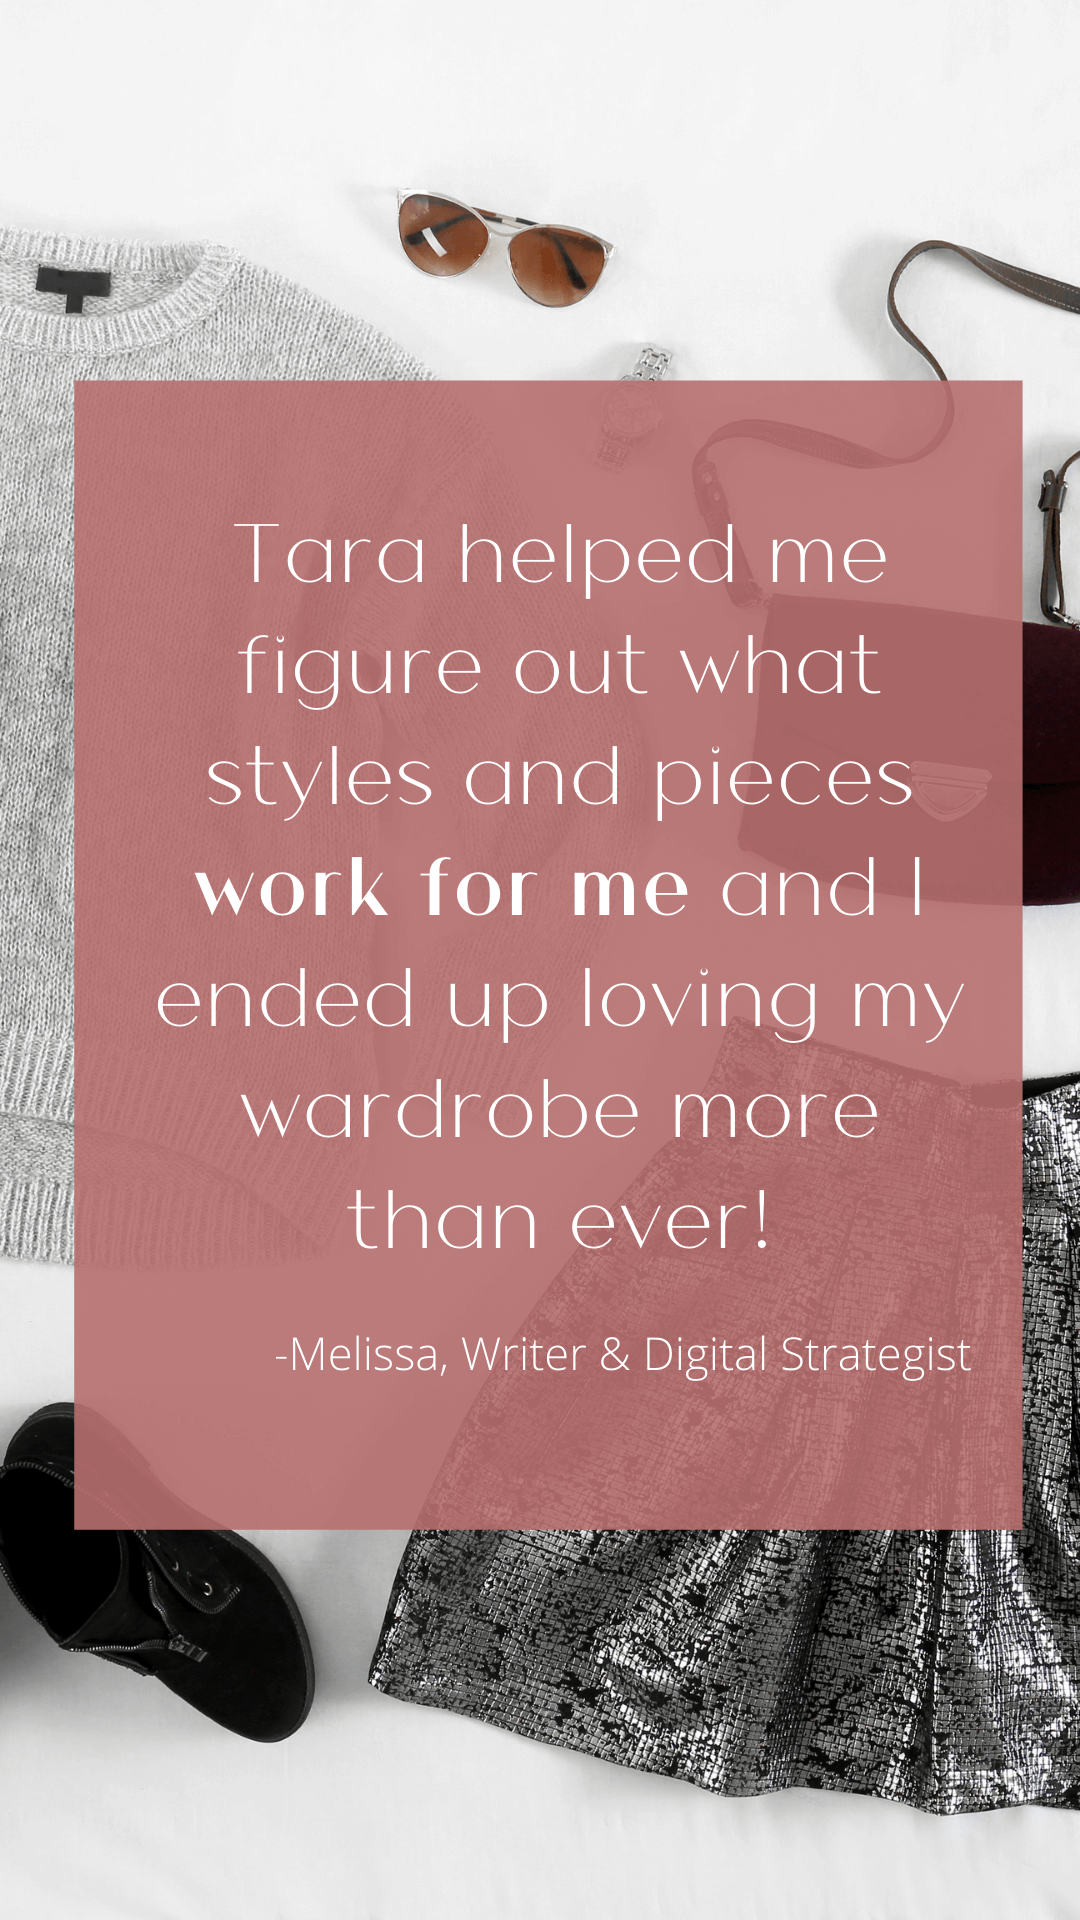 Testimonial image reads Tara helped me figure out what styles and pieces work for me and I ended up loving my wardrobe more than ever!